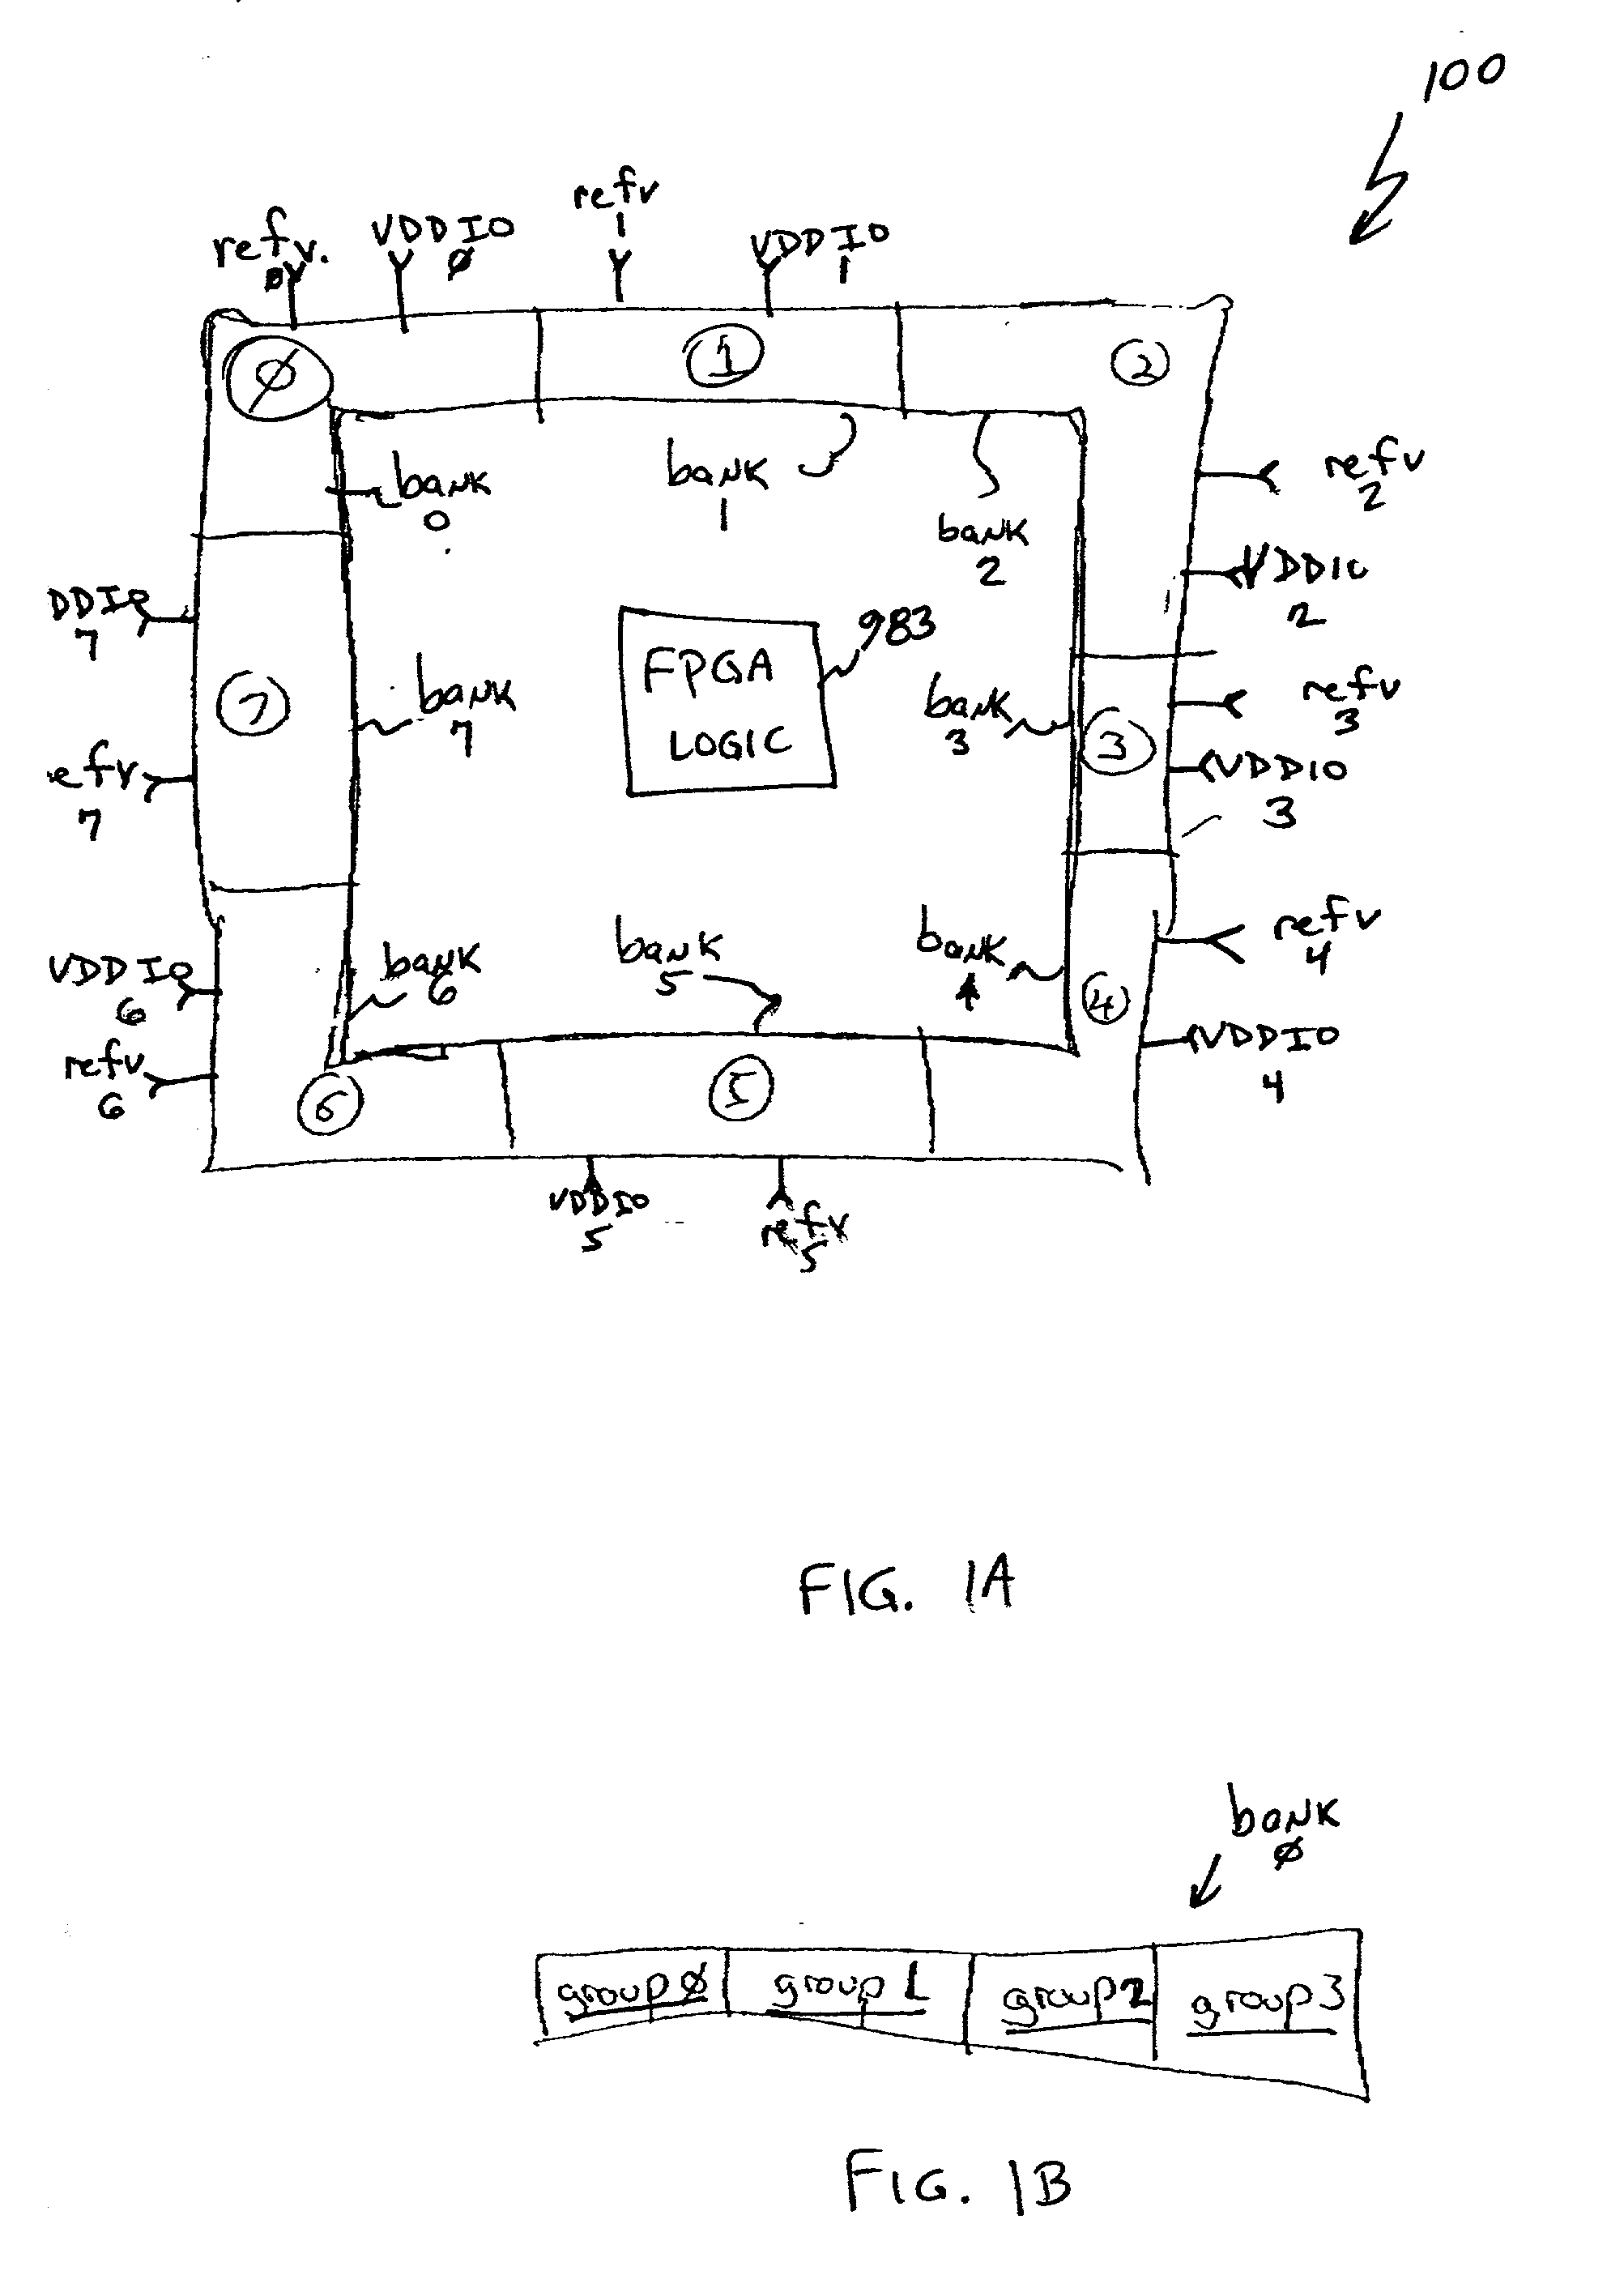 Double data rate input and output in a programmable logic device